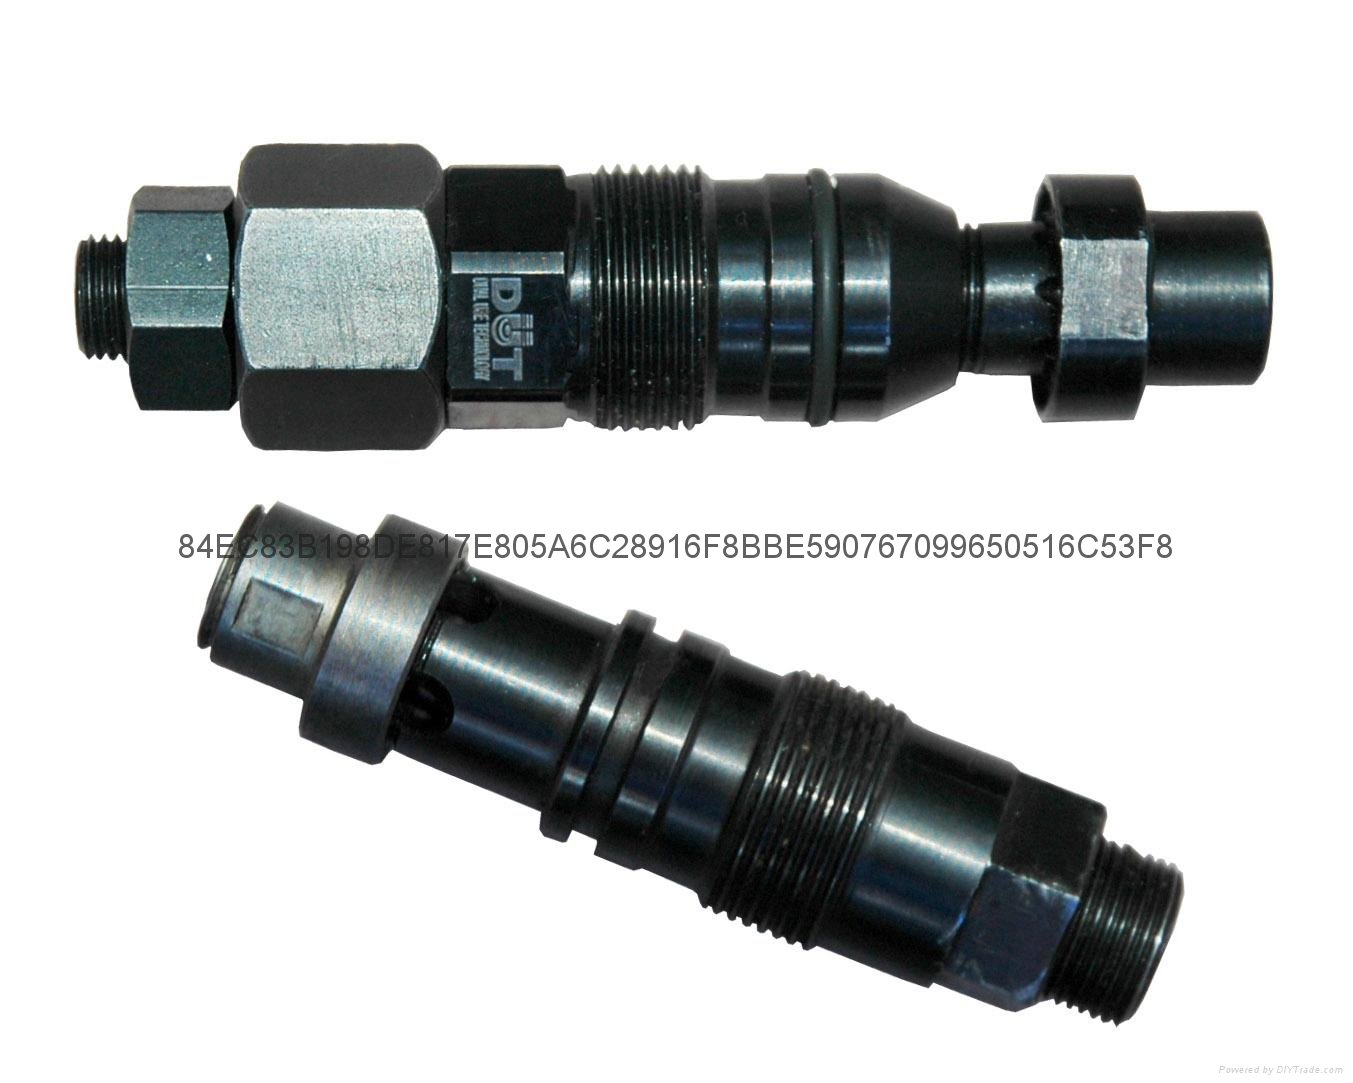 High pressure mixing nozzle of DUT made in Korea 5